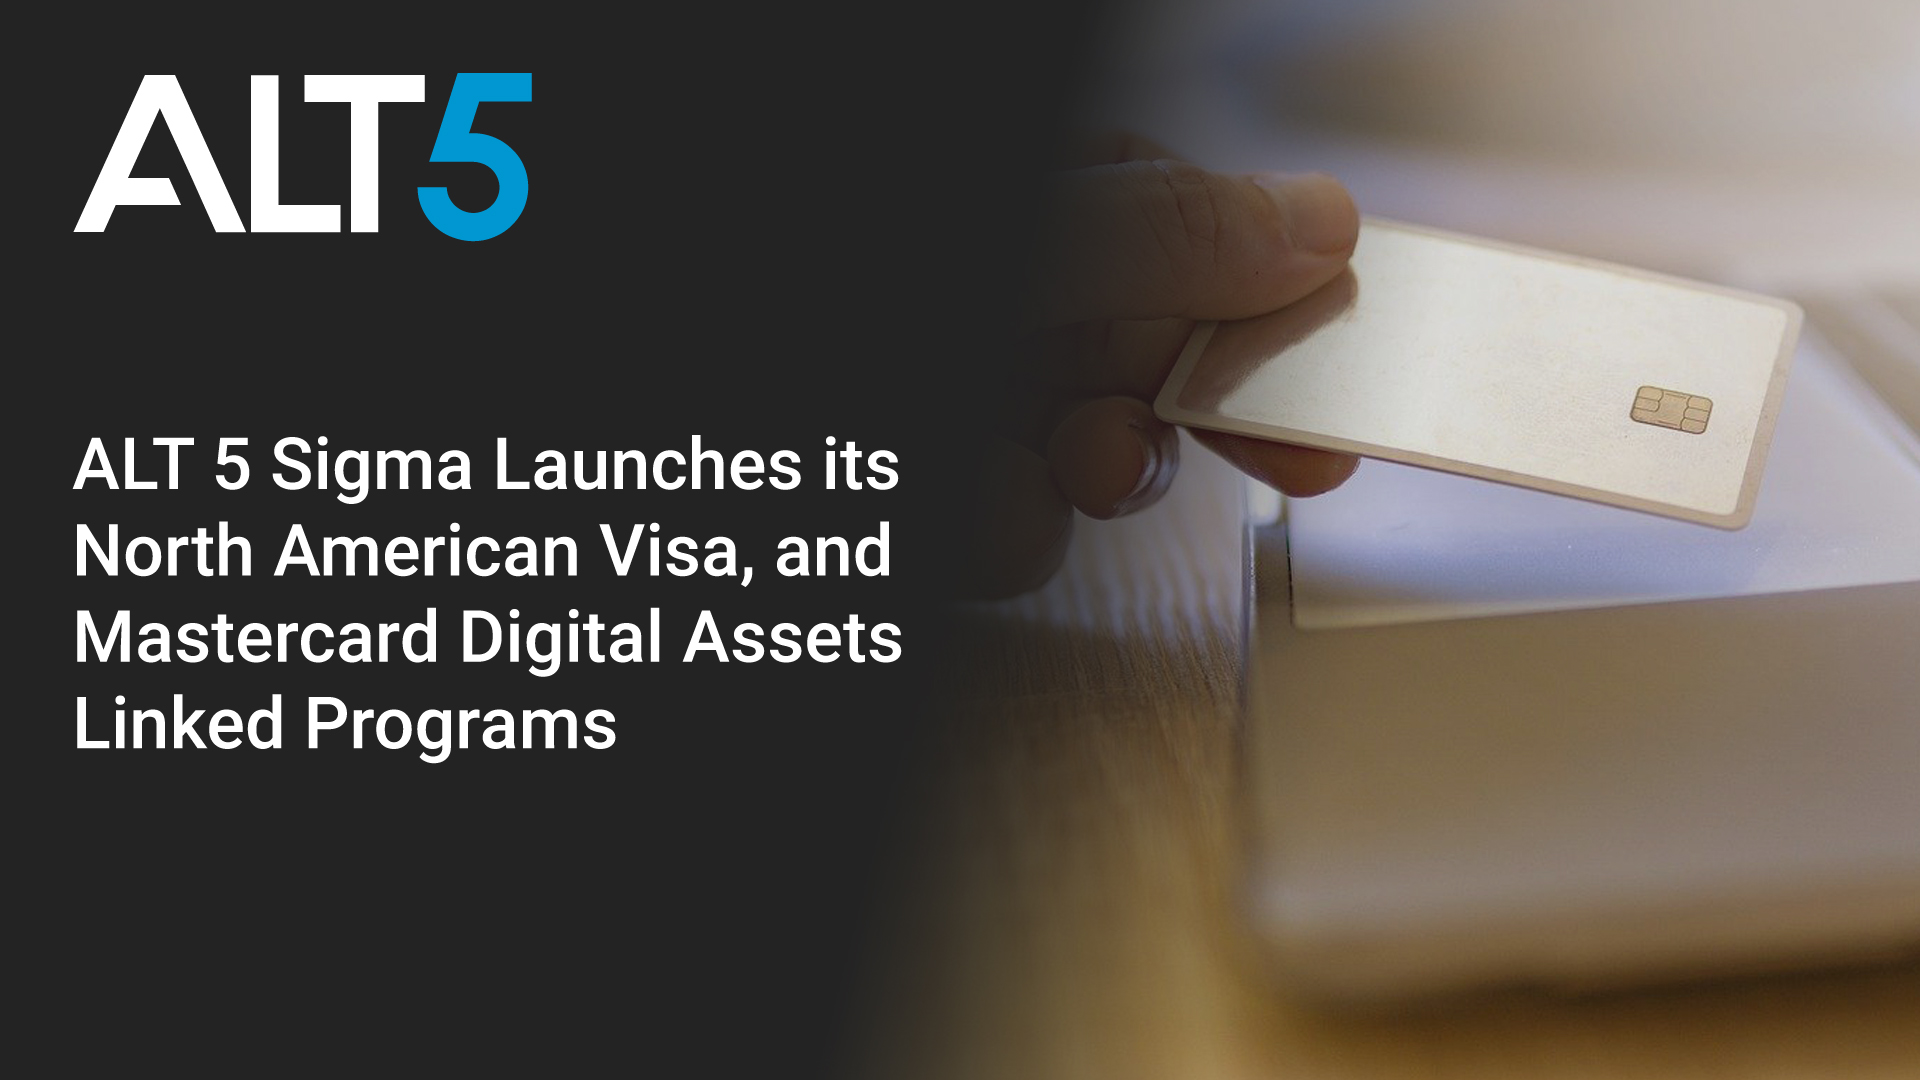 ALT 5 Sigma Launches its North American Visa, and Mastercard Digital Assets Linked Programs